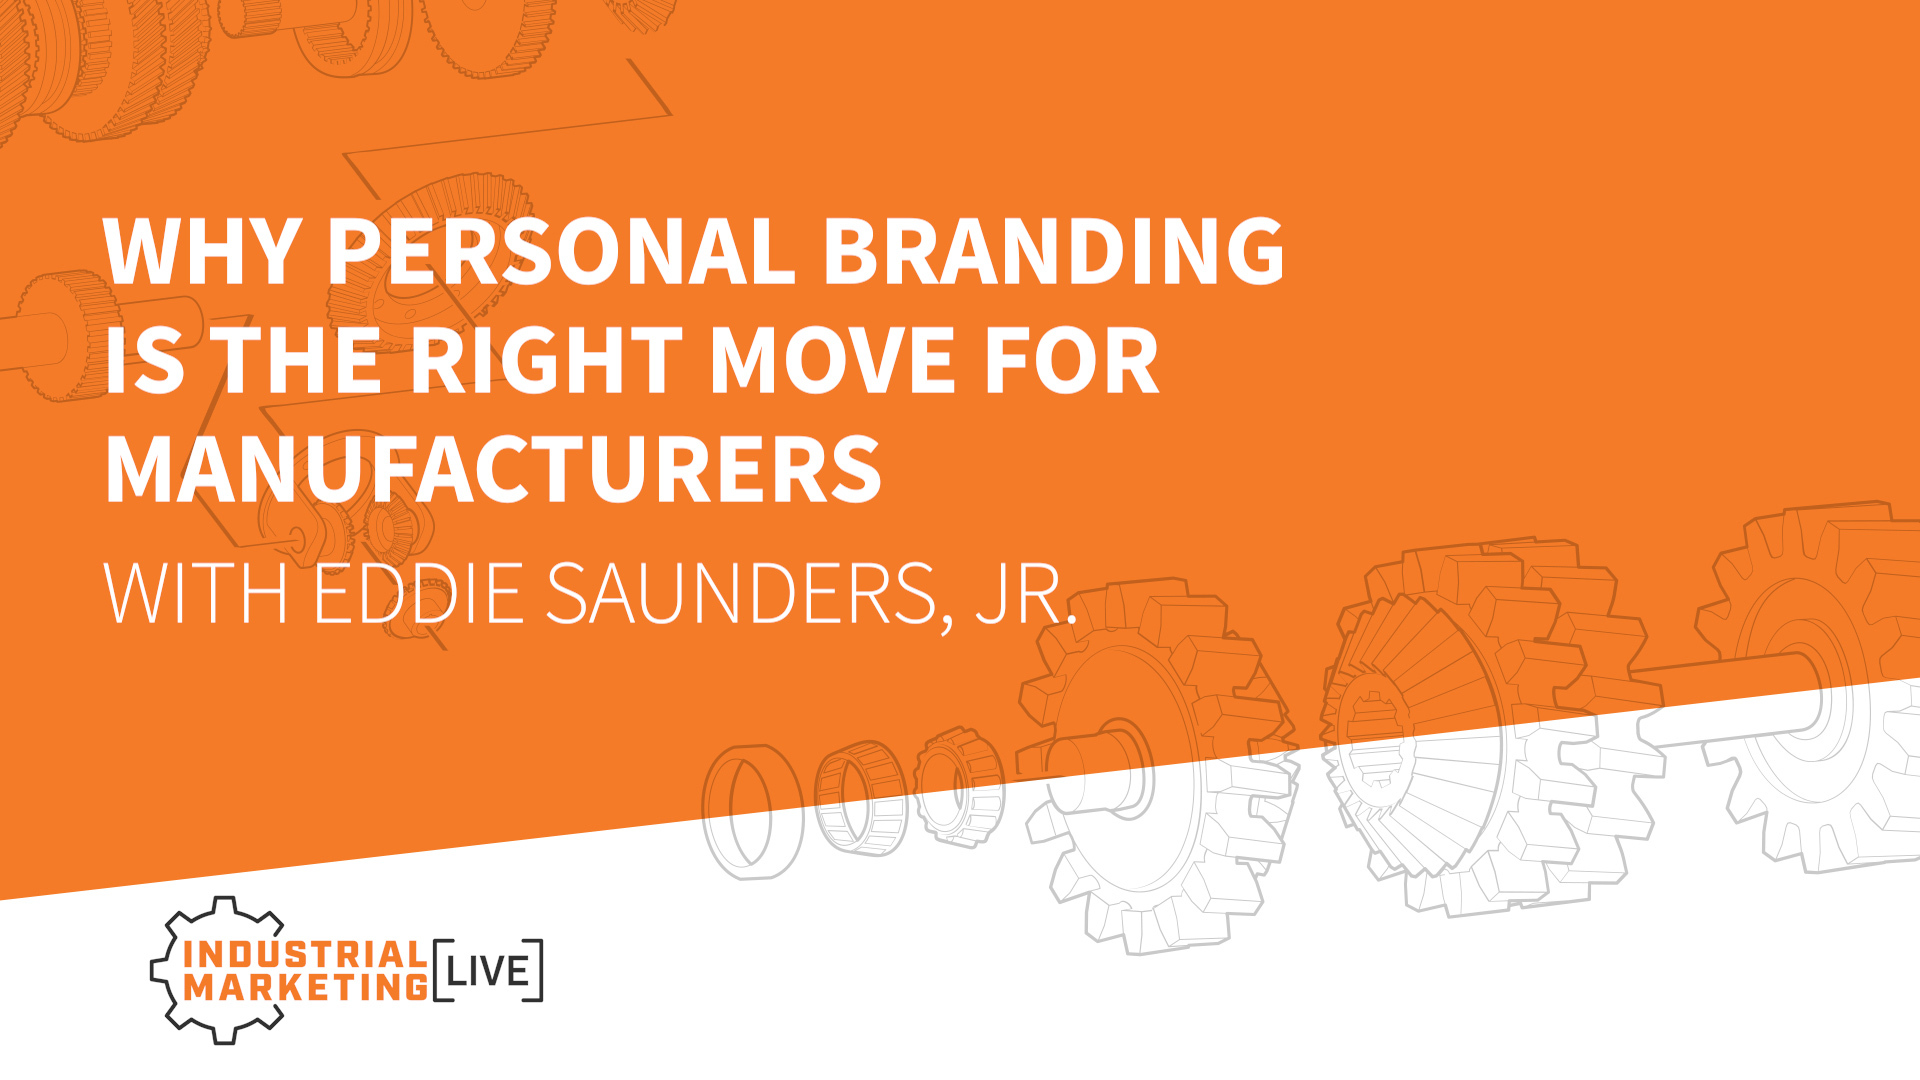 Personal branding is the right move for manufacturers